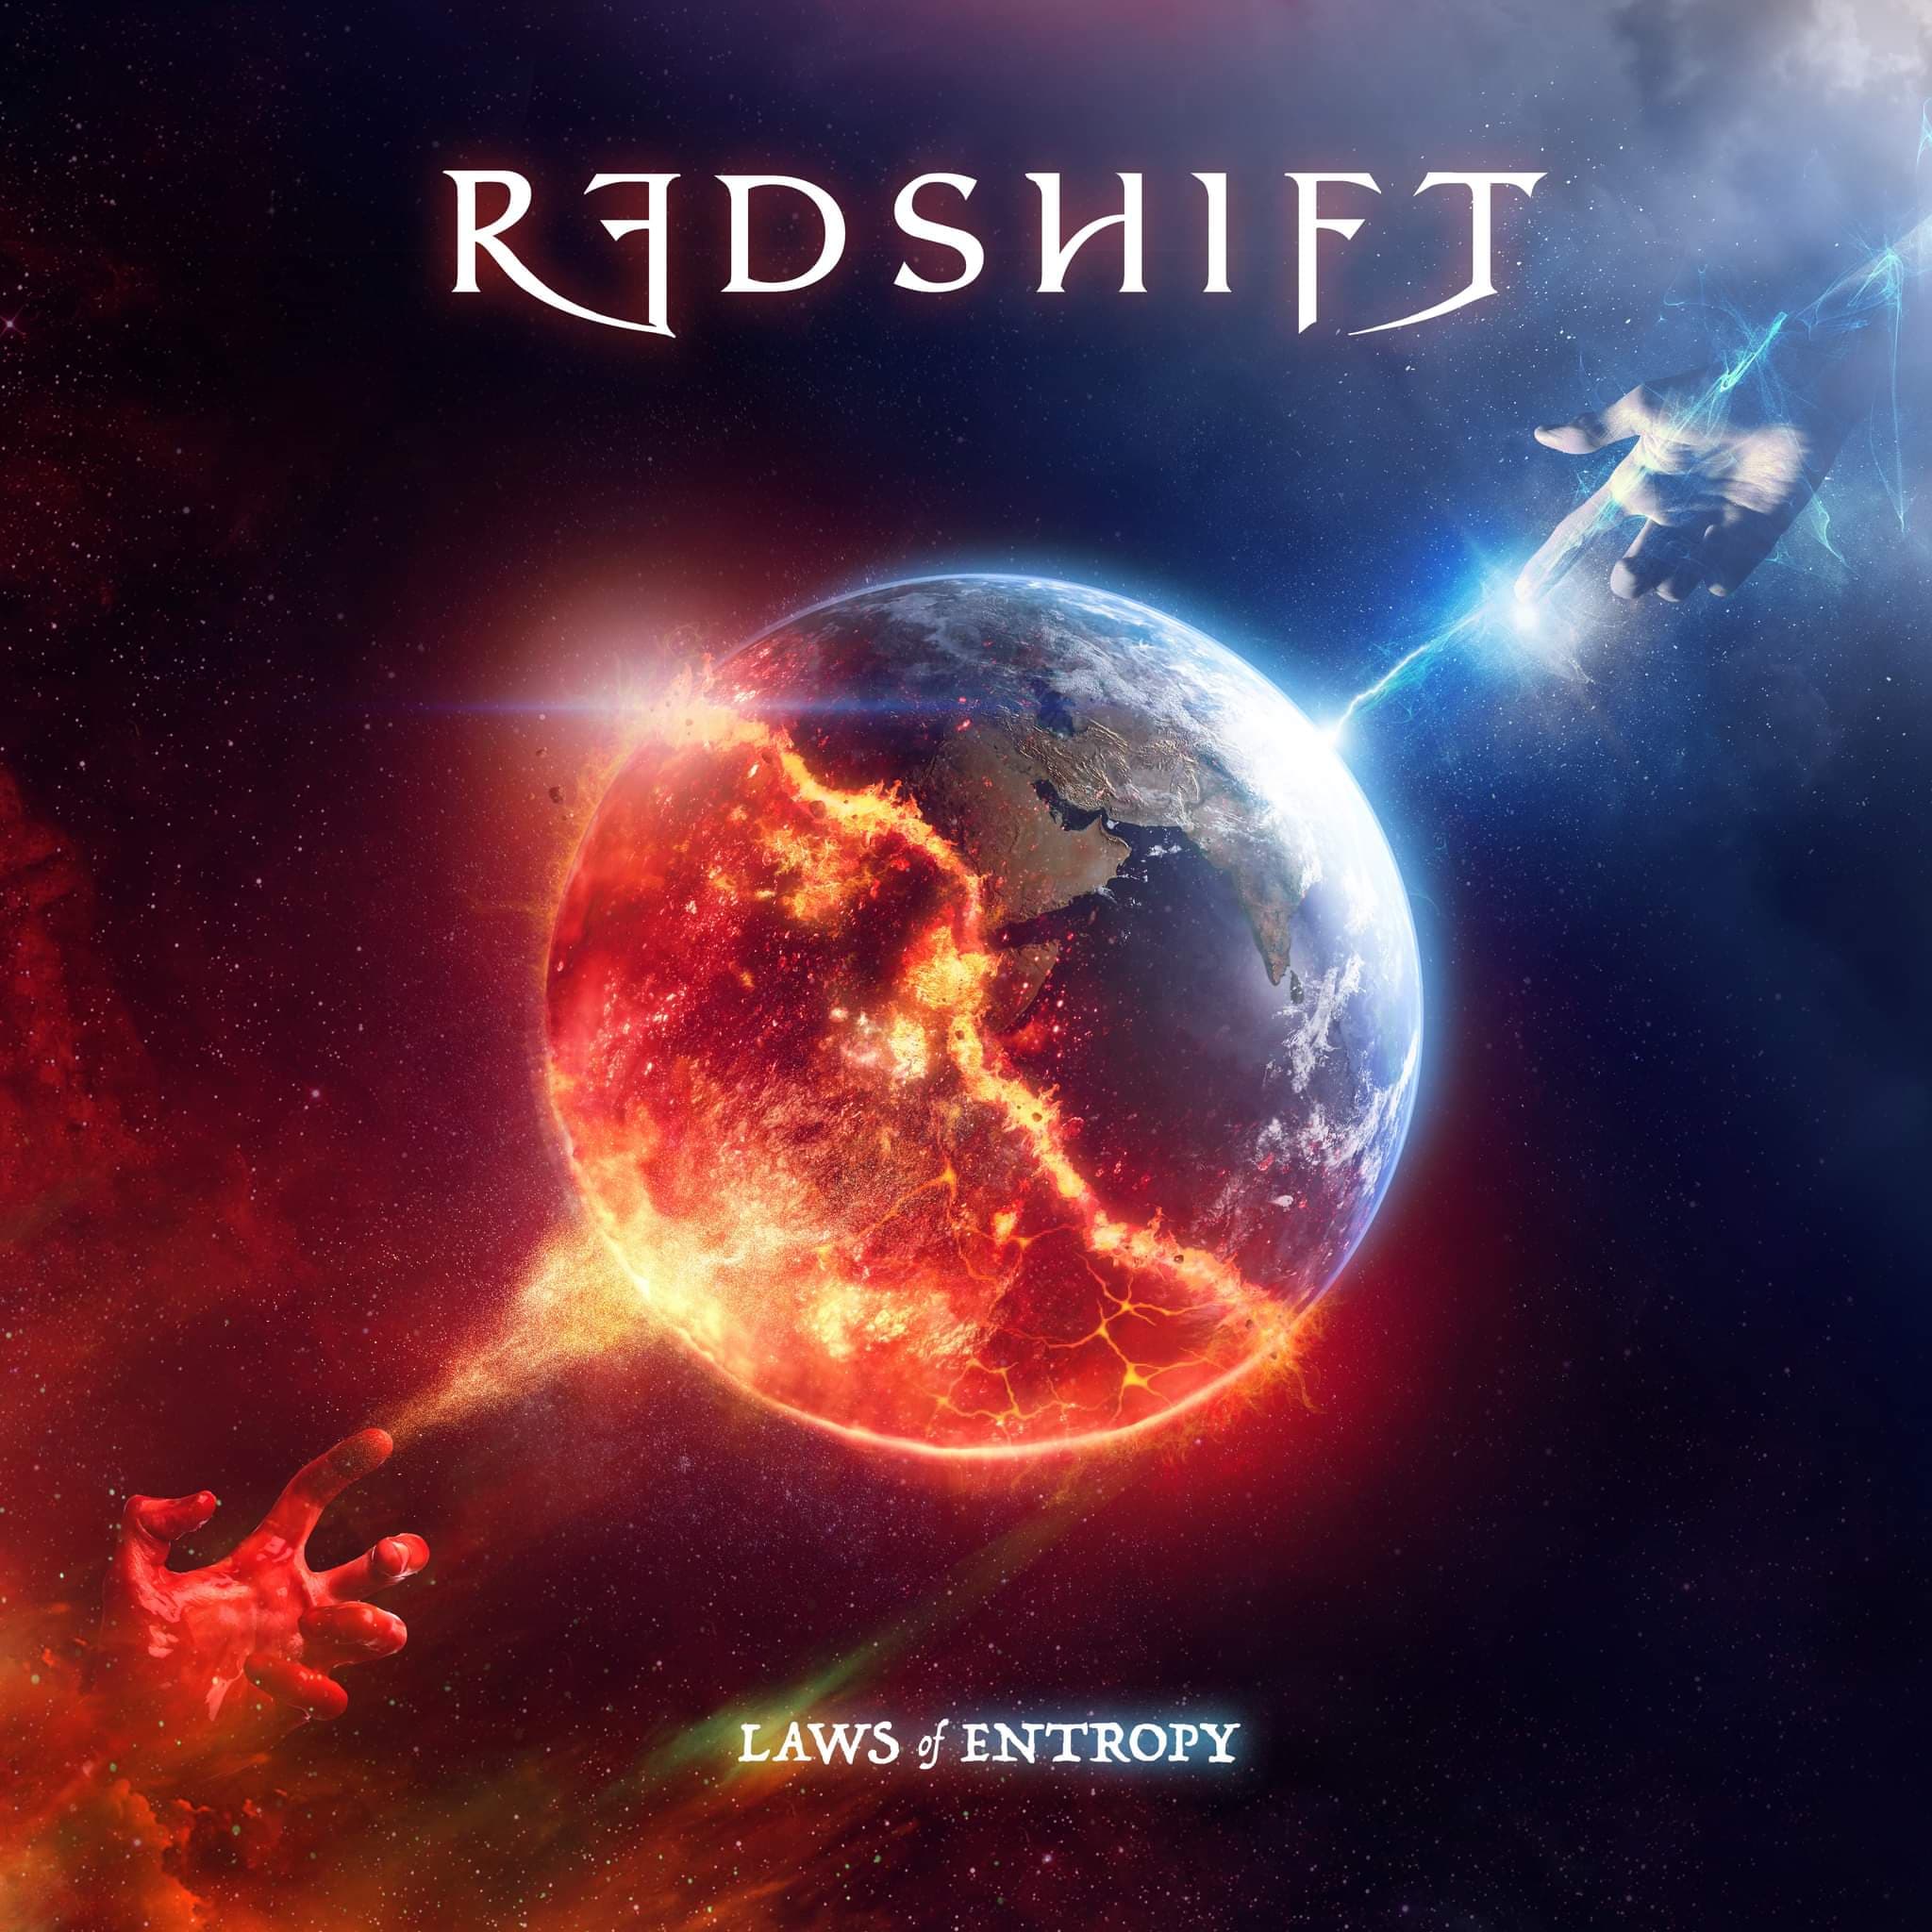 ALBUM REVIEW: Laws of Entropy by Redshift